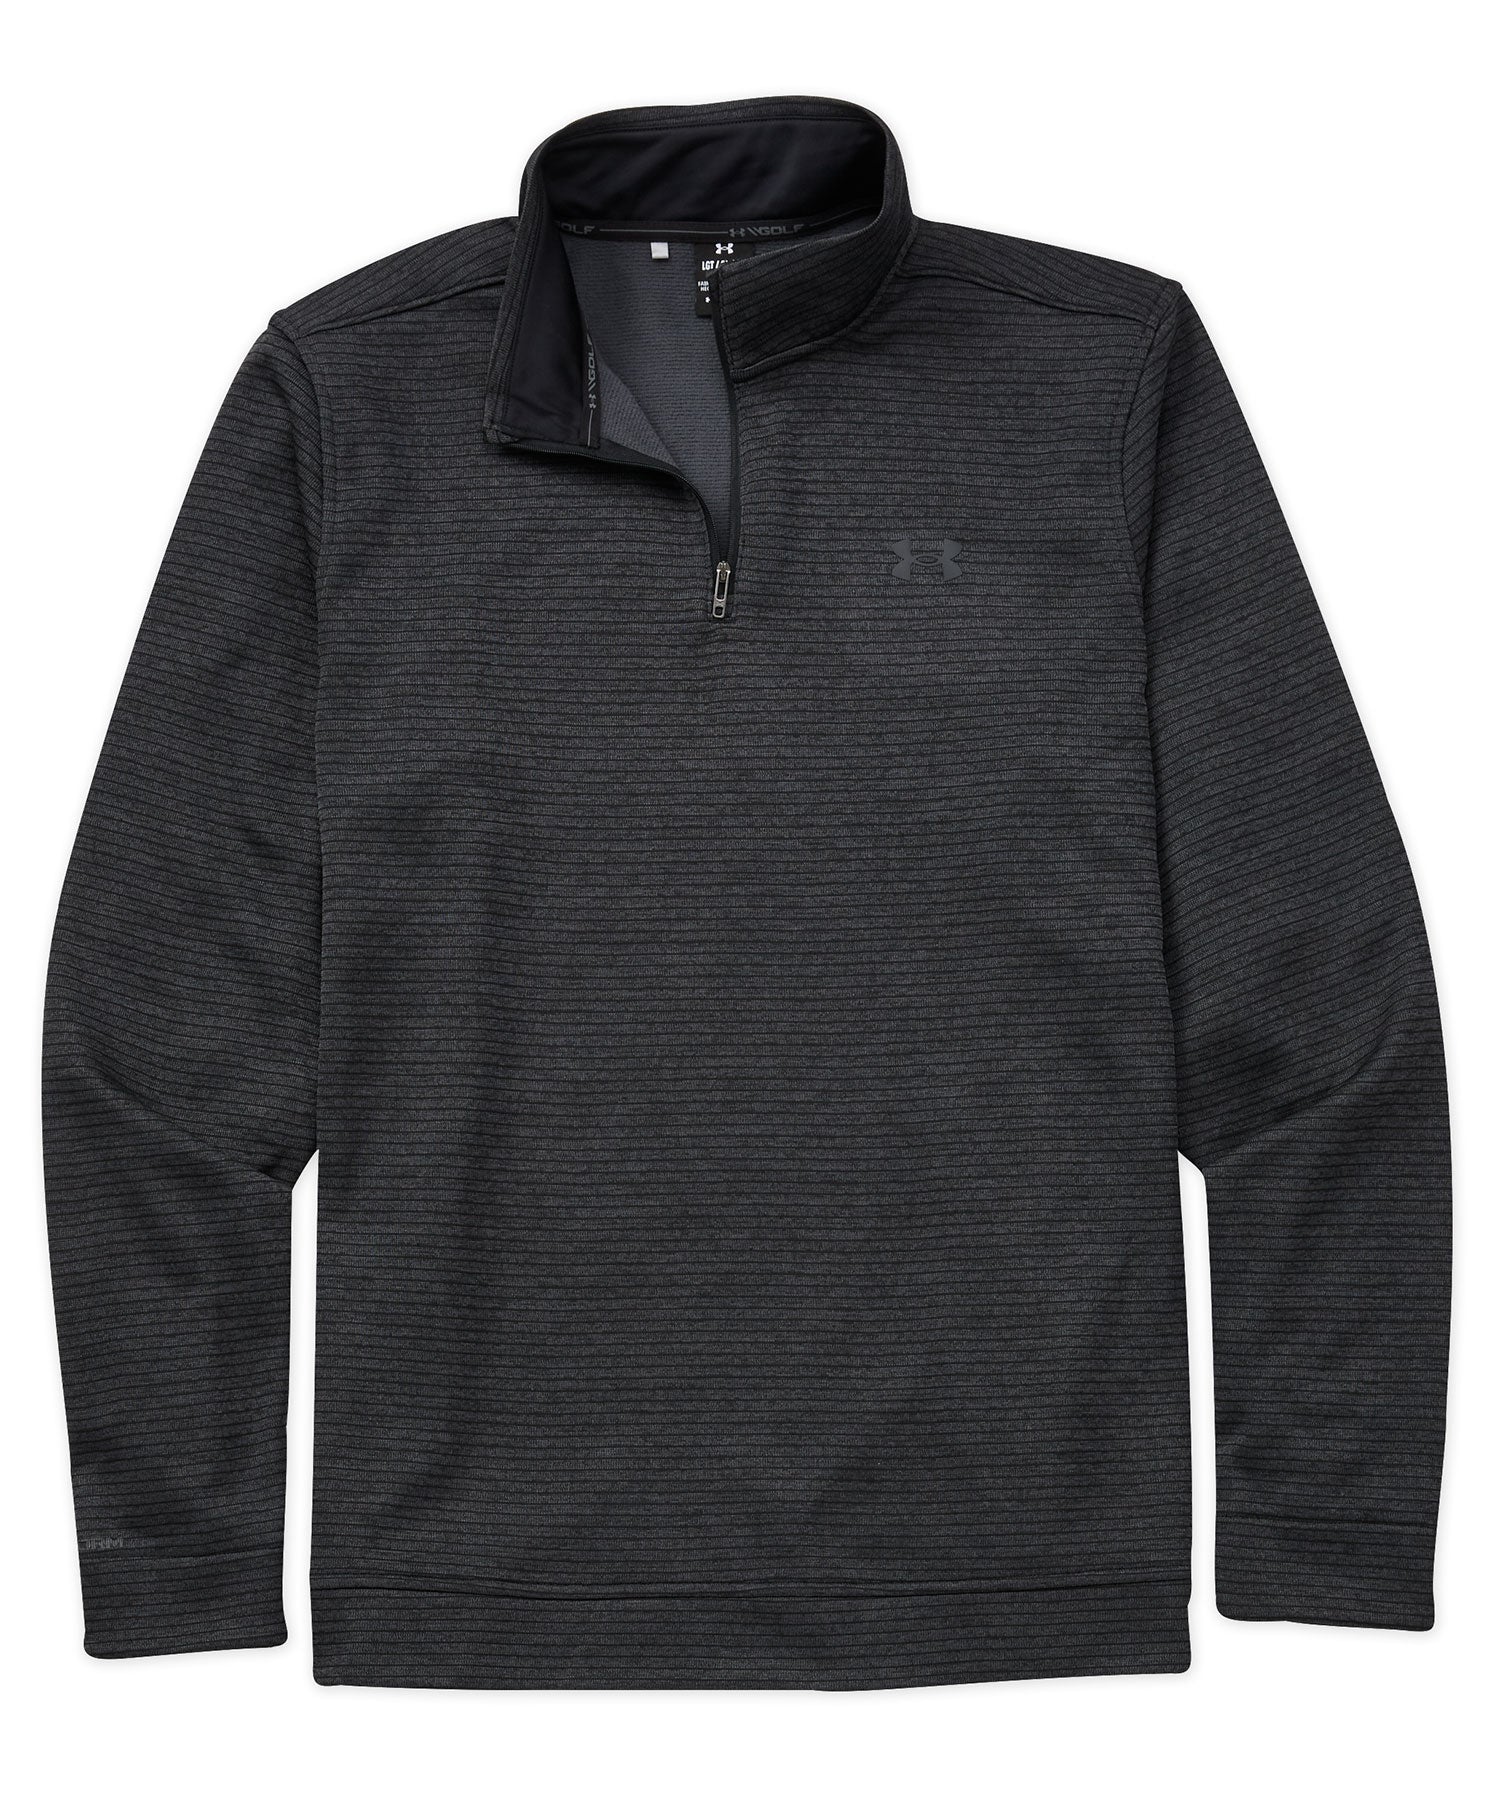 Maglione in pile Under Armour 1/4 Zip, Men's Big & Tall